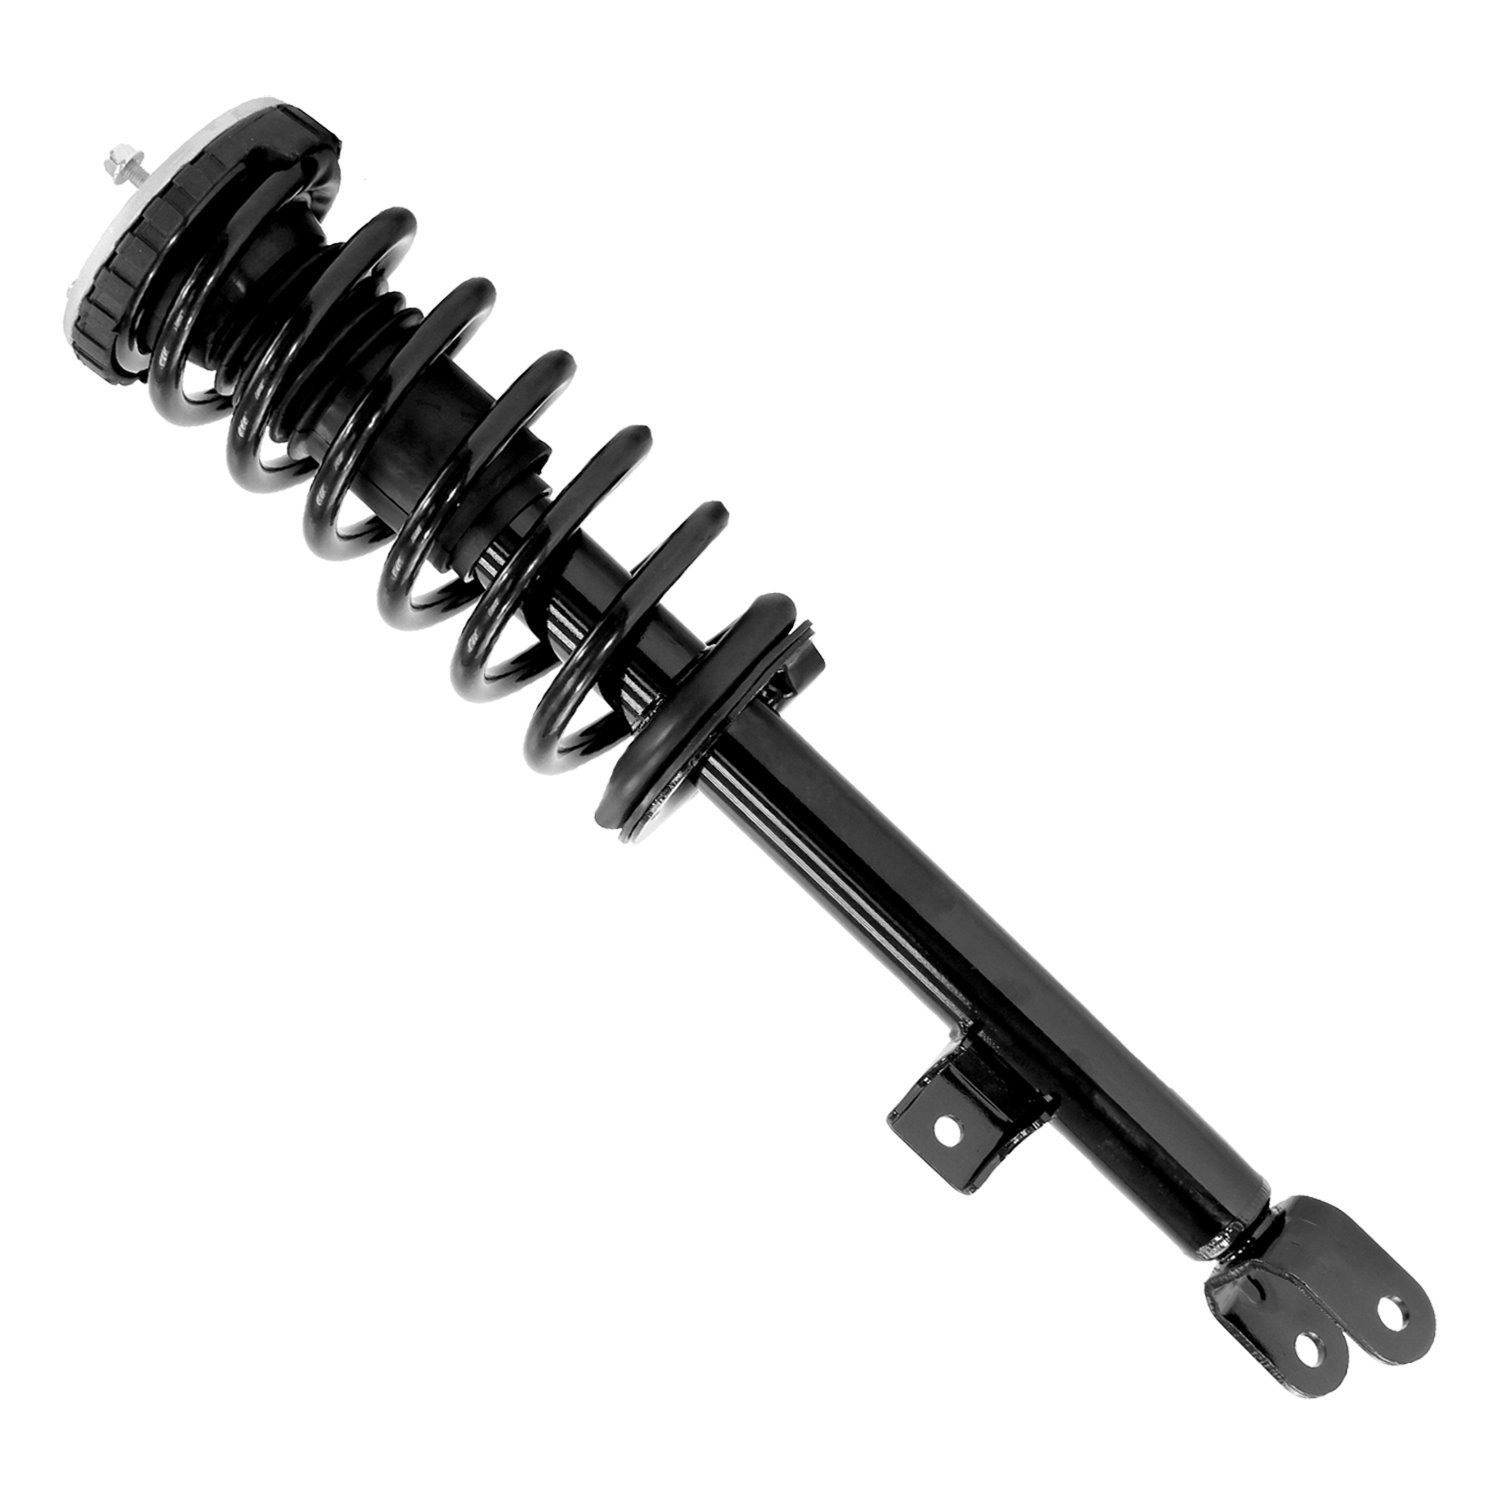 13594 Front Suspension Strut & Coil Spring Assemby Fits Select Genesis G80, Hyundai Genesis